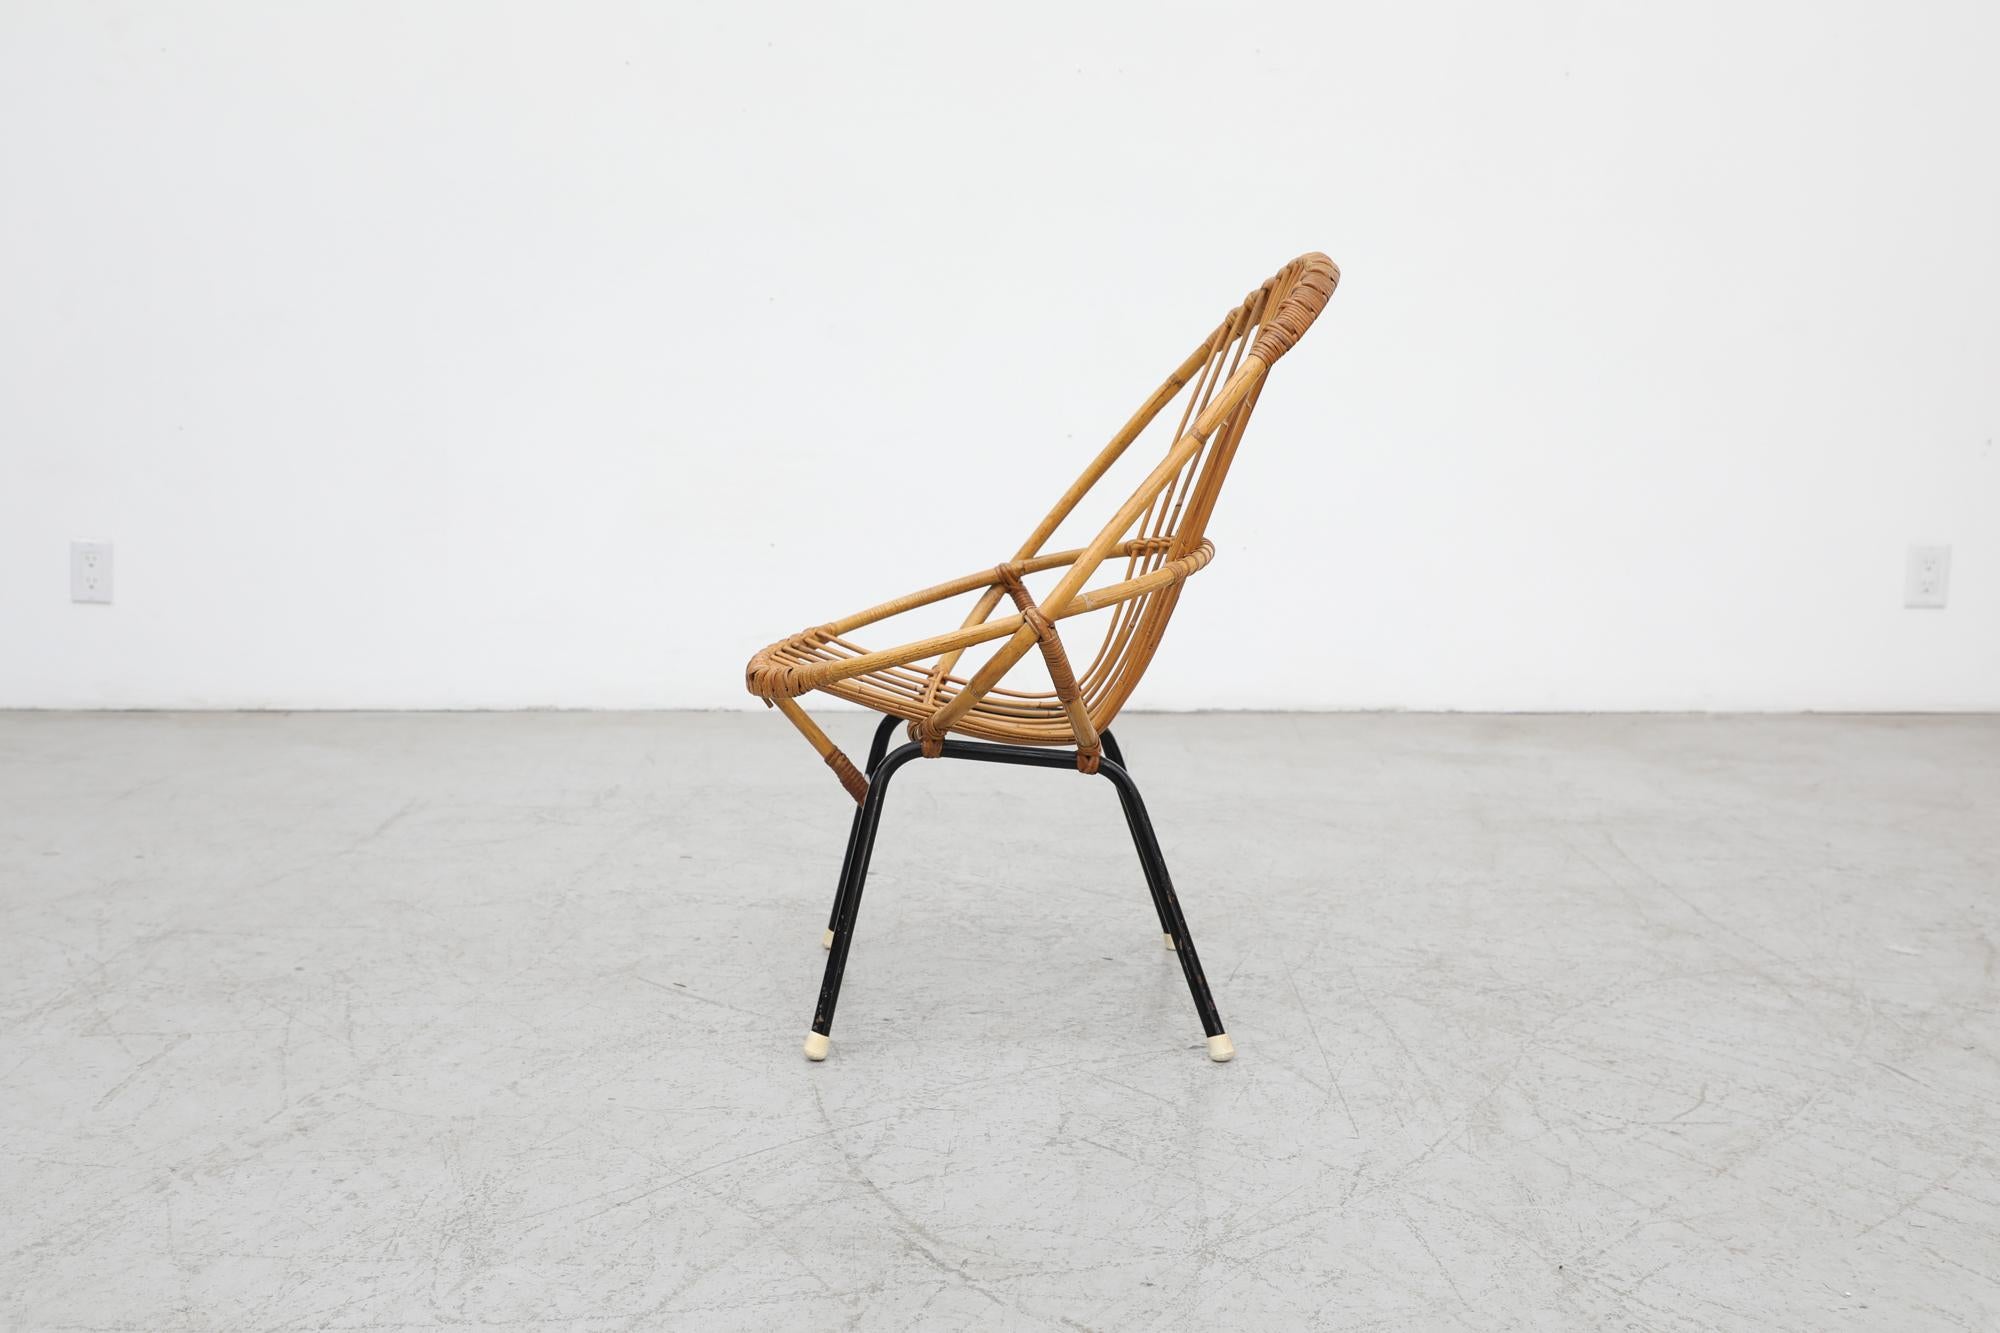 Cute little Mid-Century bamboo hoop chair by Rohe Noordwolde on black enameled metal frame with white foot caps. In original condition with visible wear including some chips and scratches. Wear is consistent with its age and use. Chair can also be